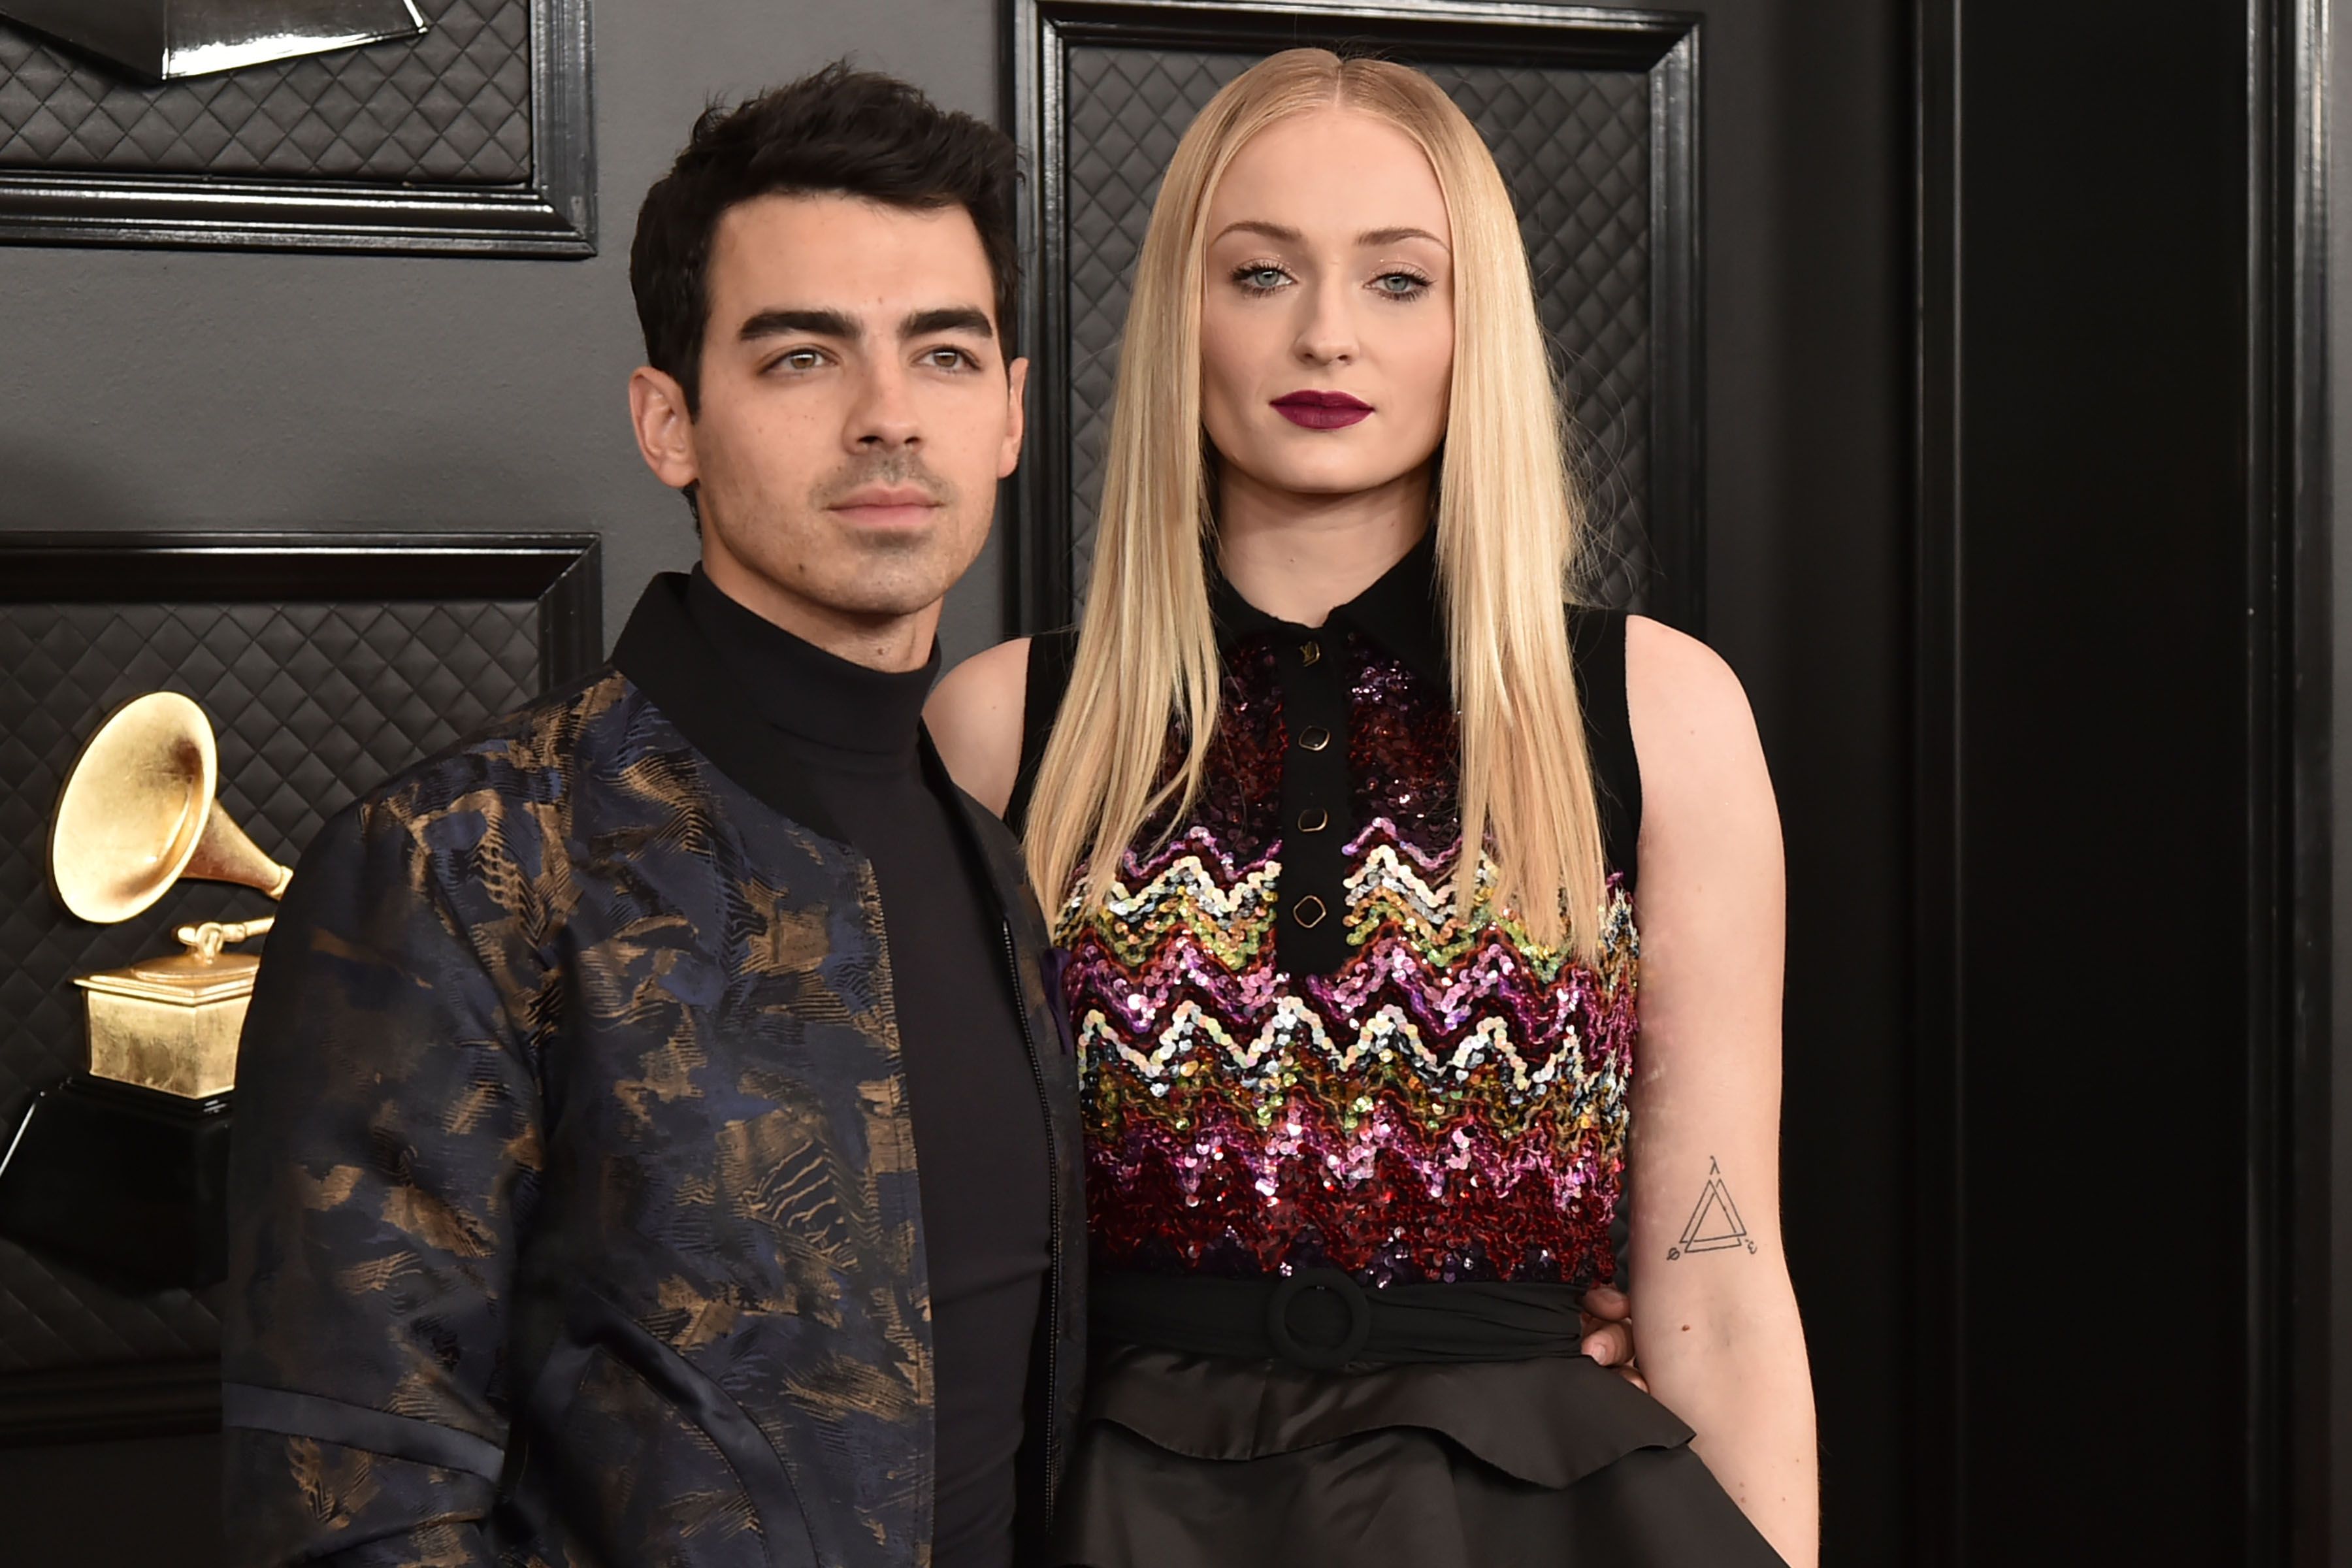 Diplo Wishes Joe Jonas and Sophie Turner 'All the Love' amid